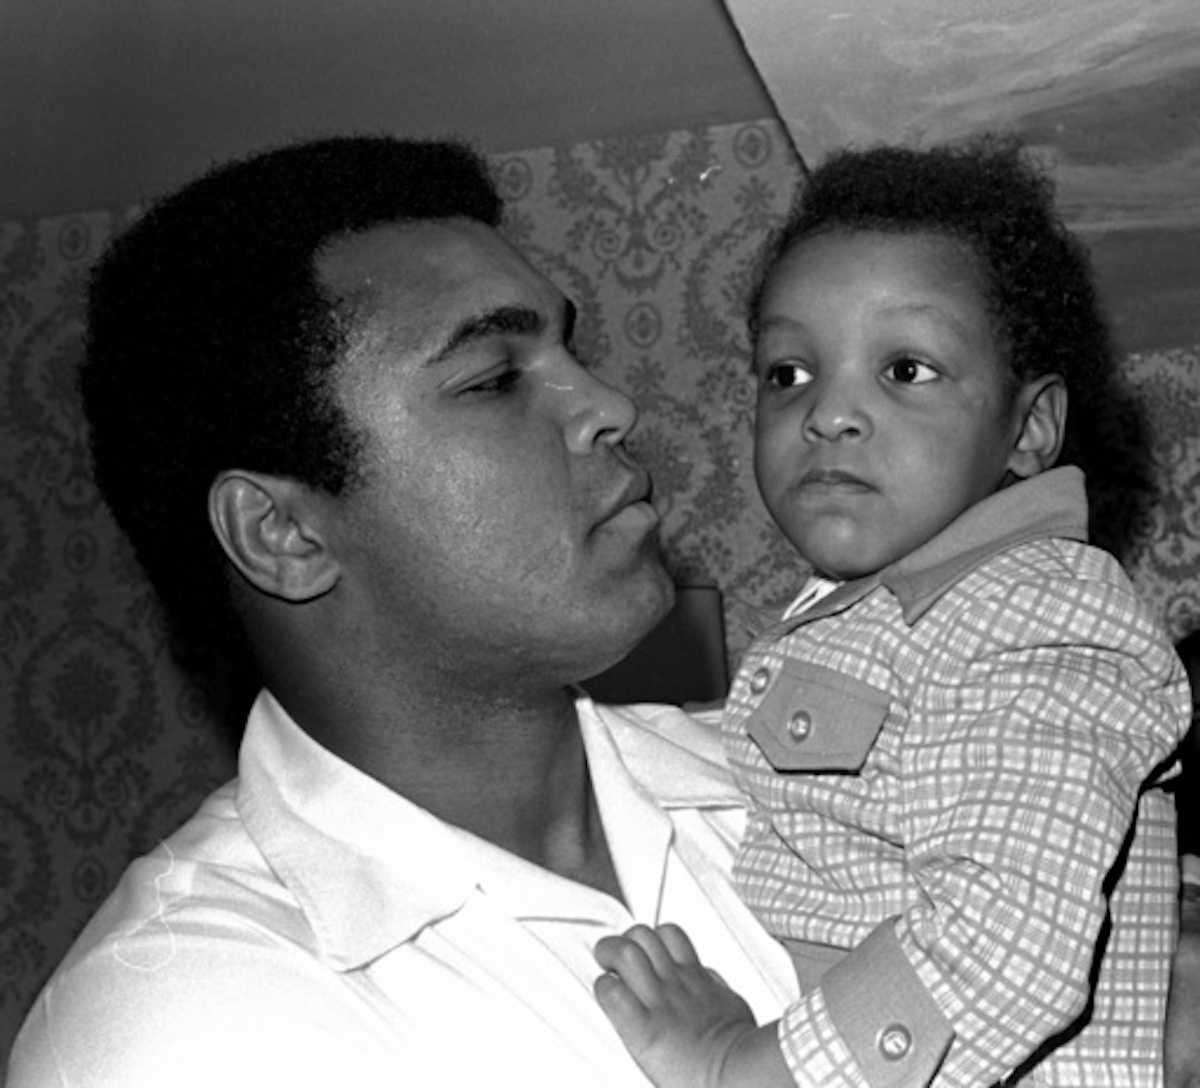 Muhammad Ali’s Son Launching Religious Freedom Campaign